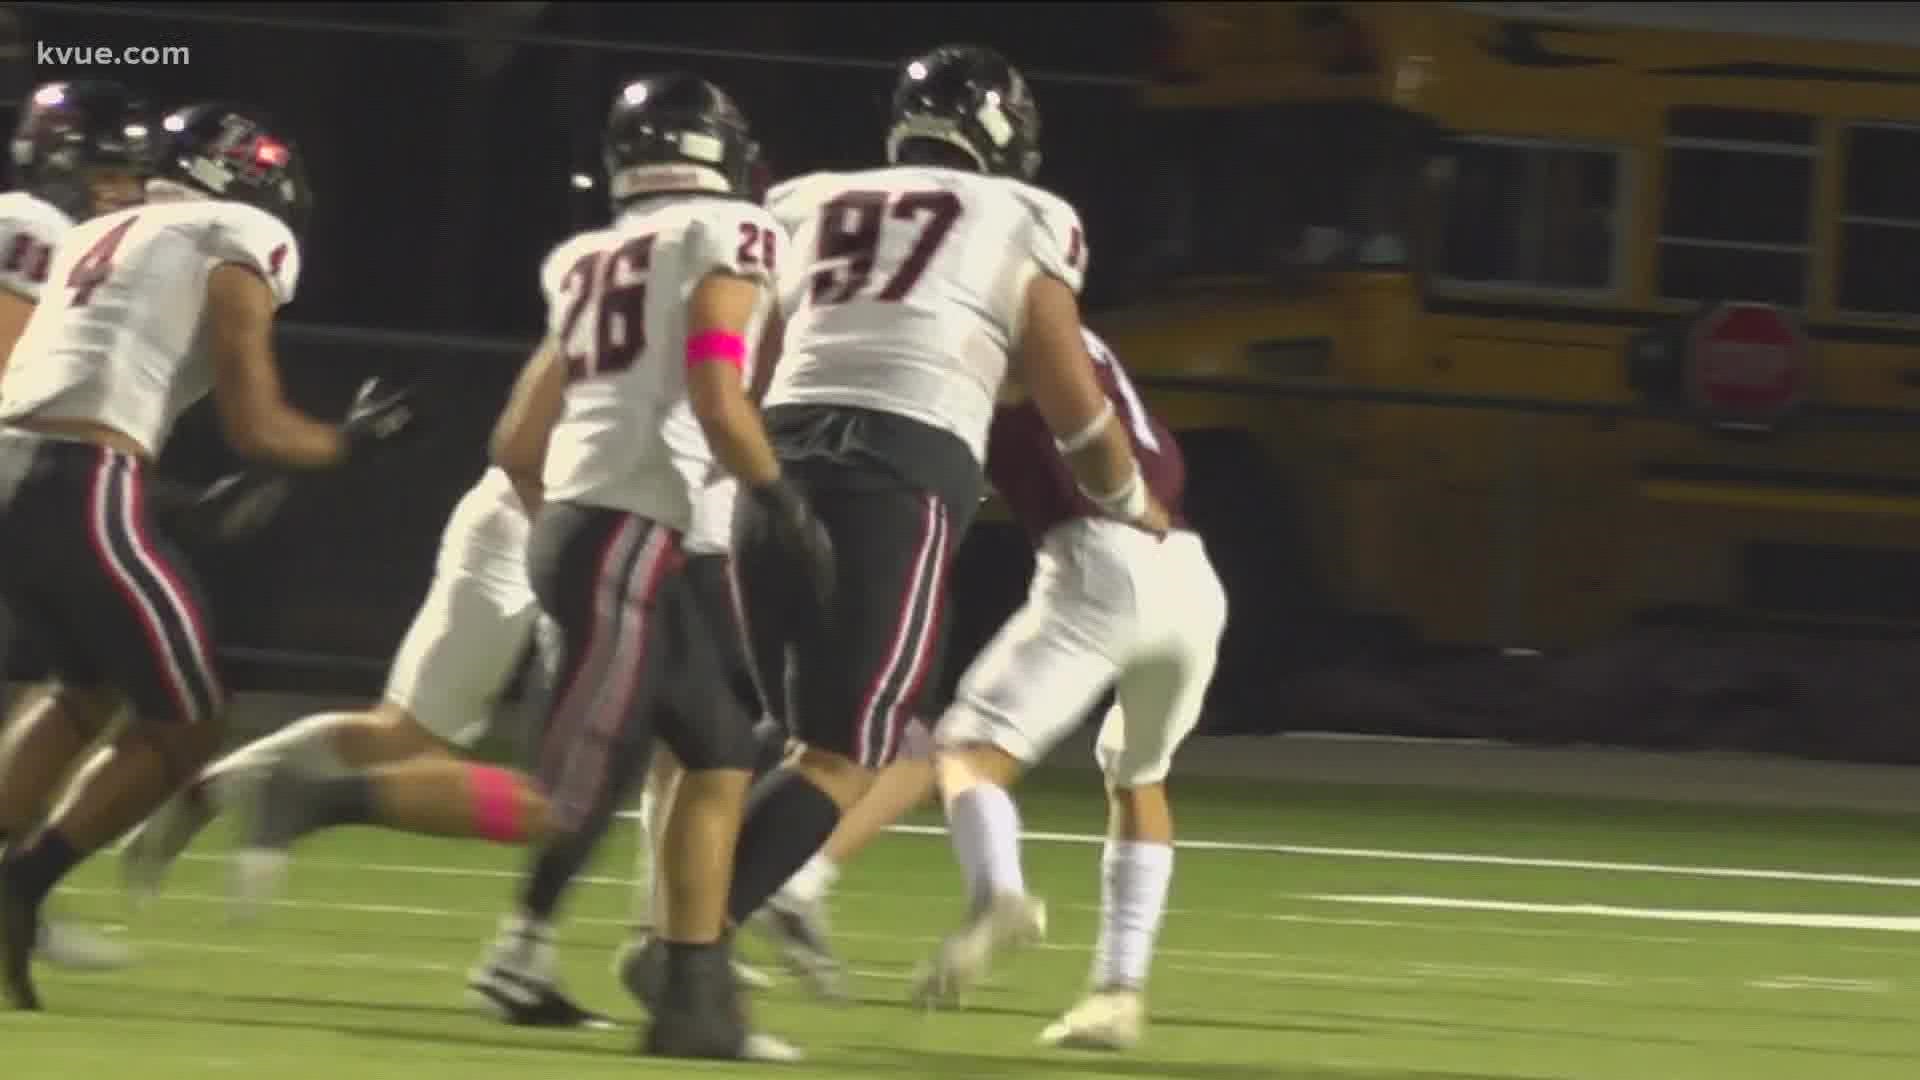 Here is a look at highlights from the Austin High School vs. Lake Travis High School game.